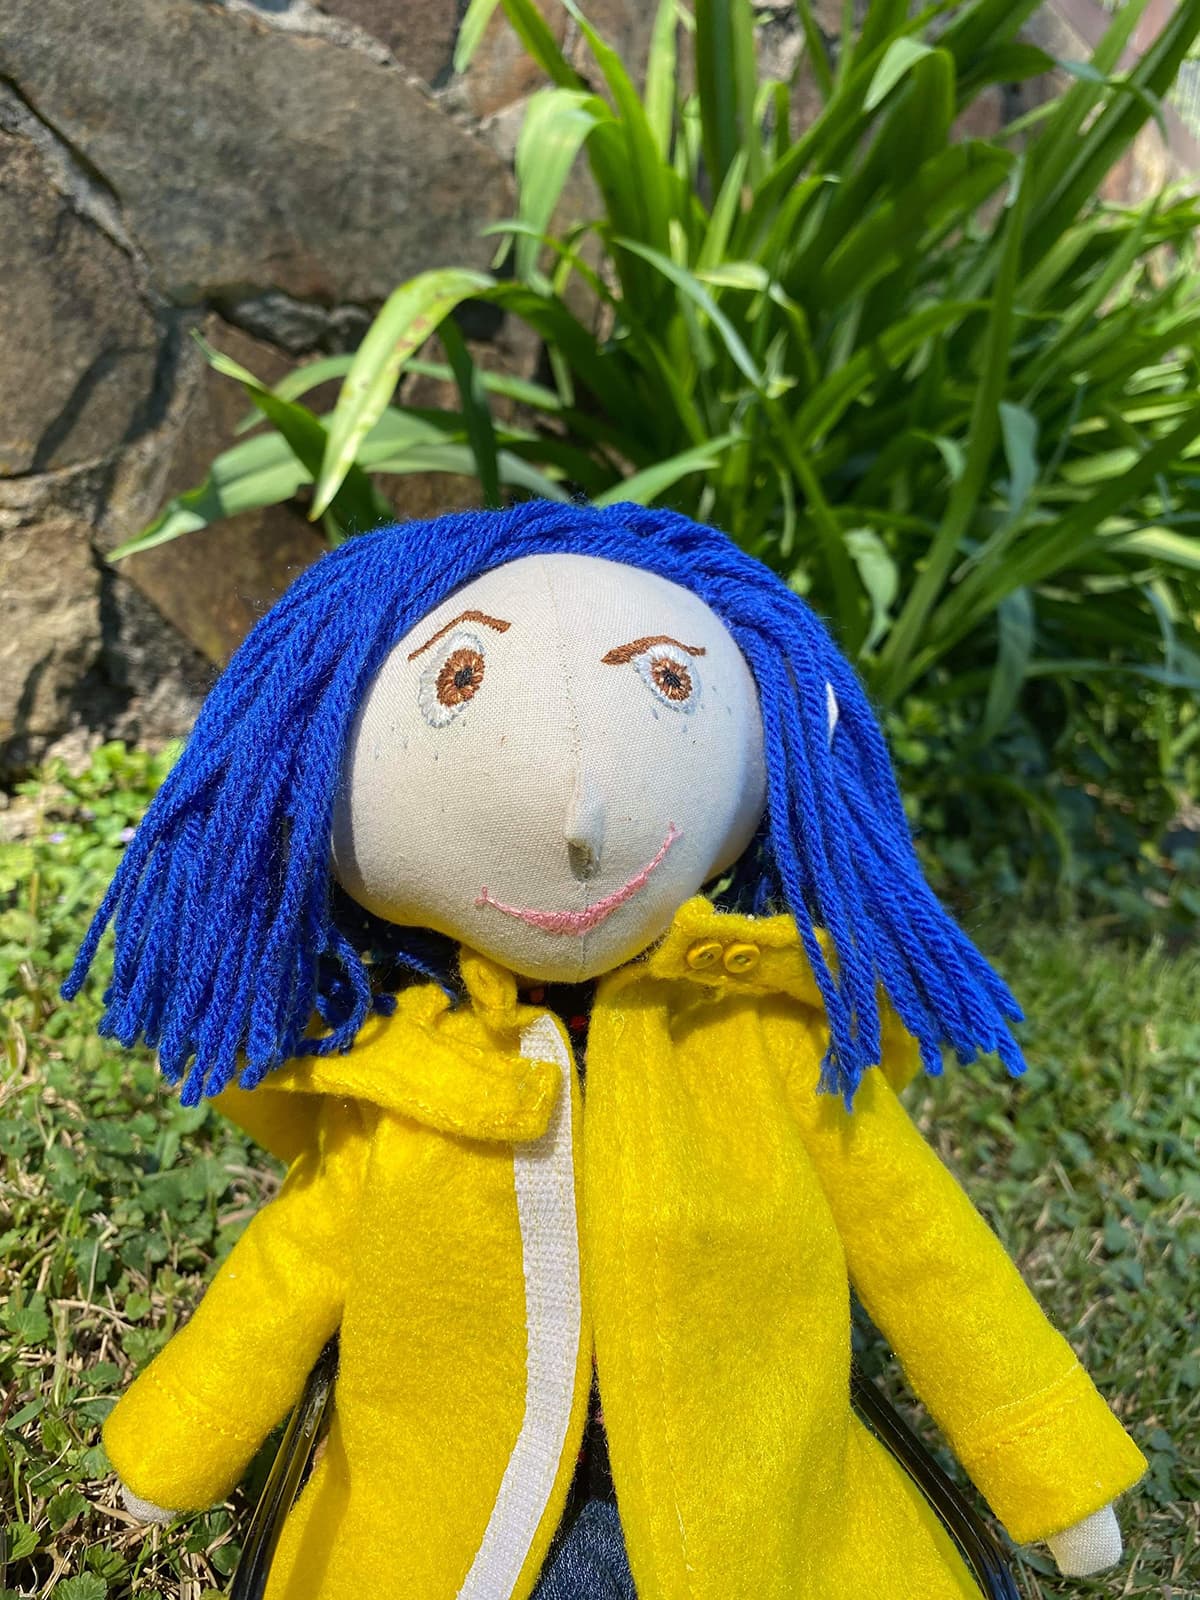 DIY Coraline doll picture